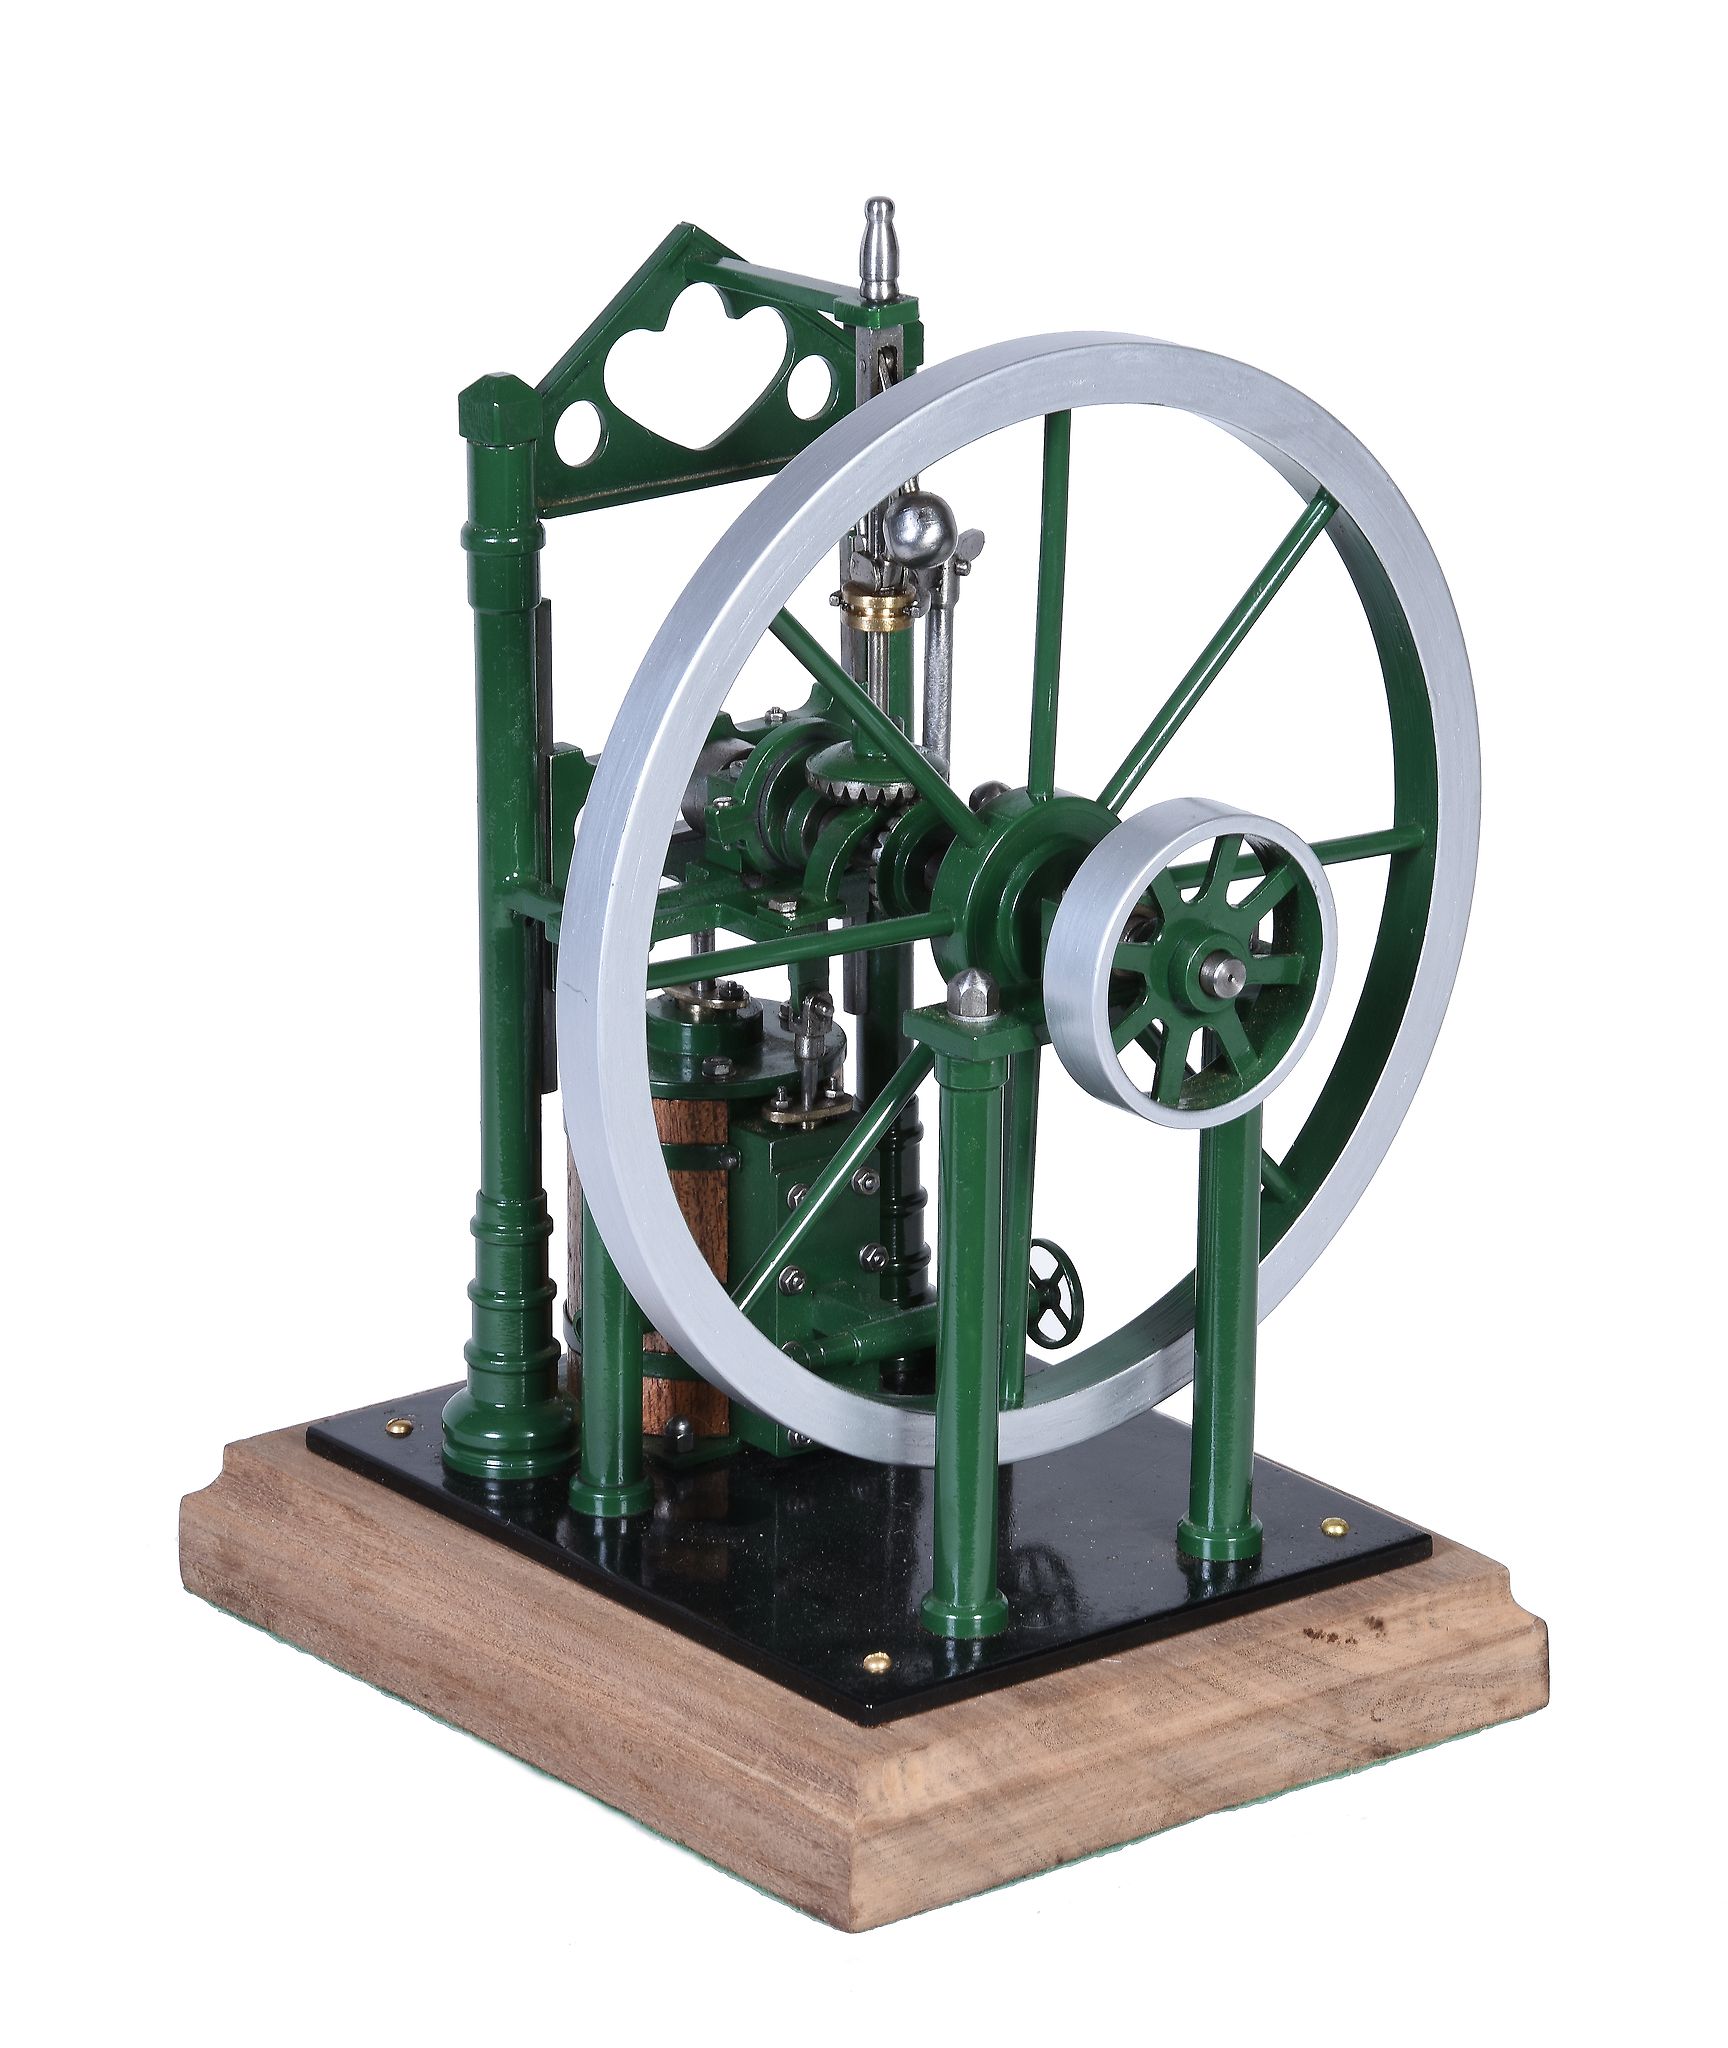 A well engineered 1 inch scale model of a Scotch crank live steam stationary engine, built to the